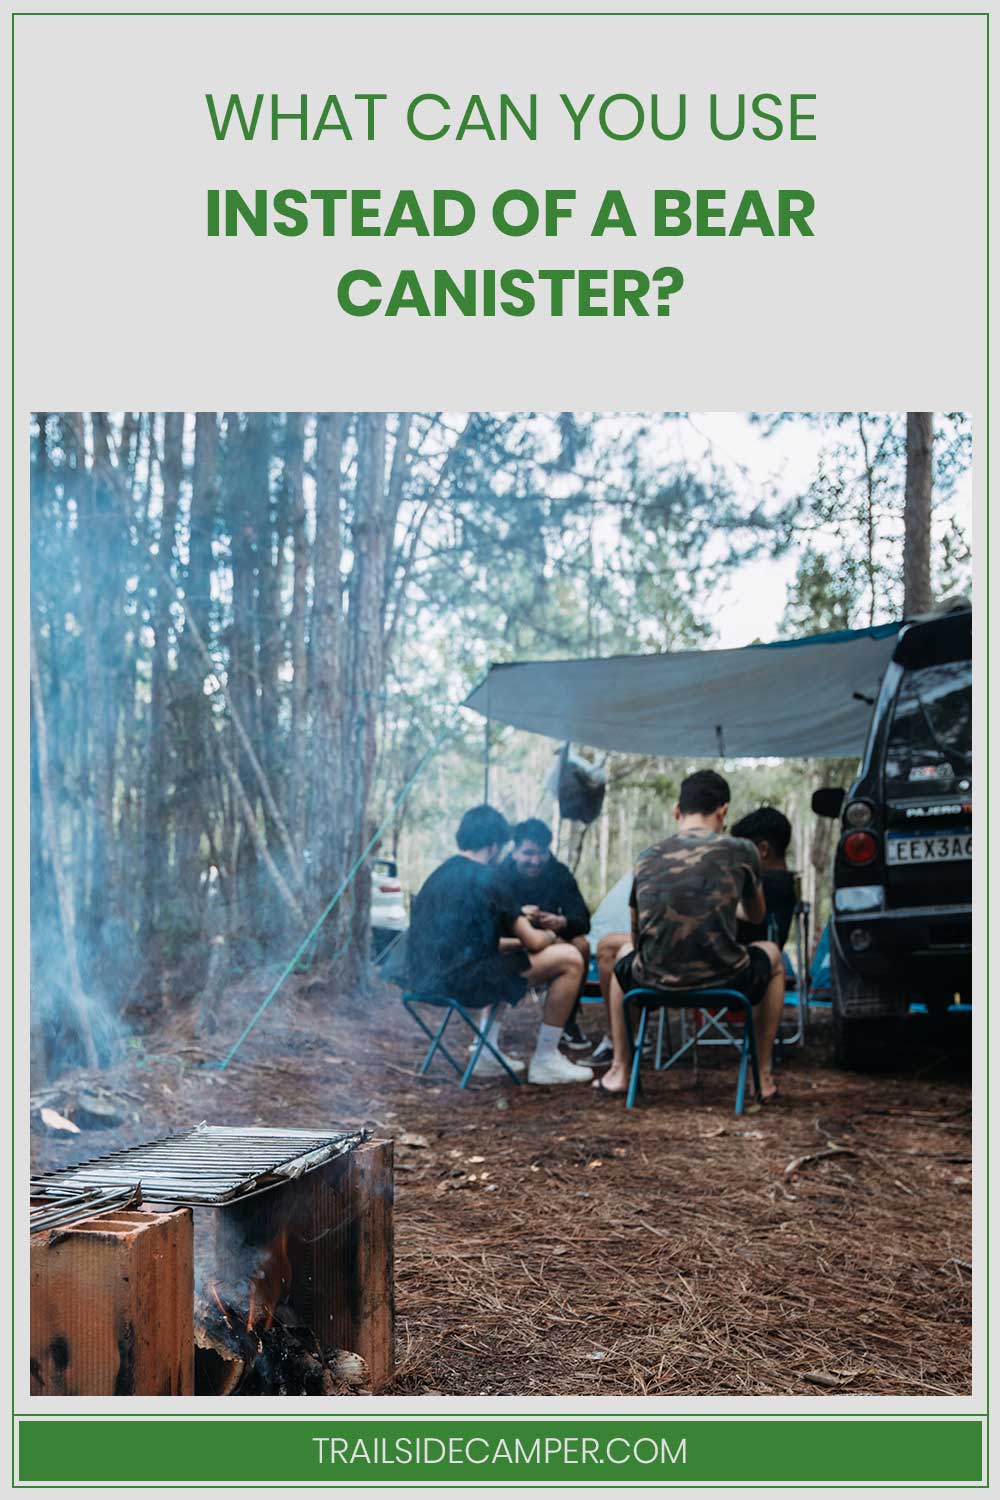 What Can You Use Instead of a Bear Canister?